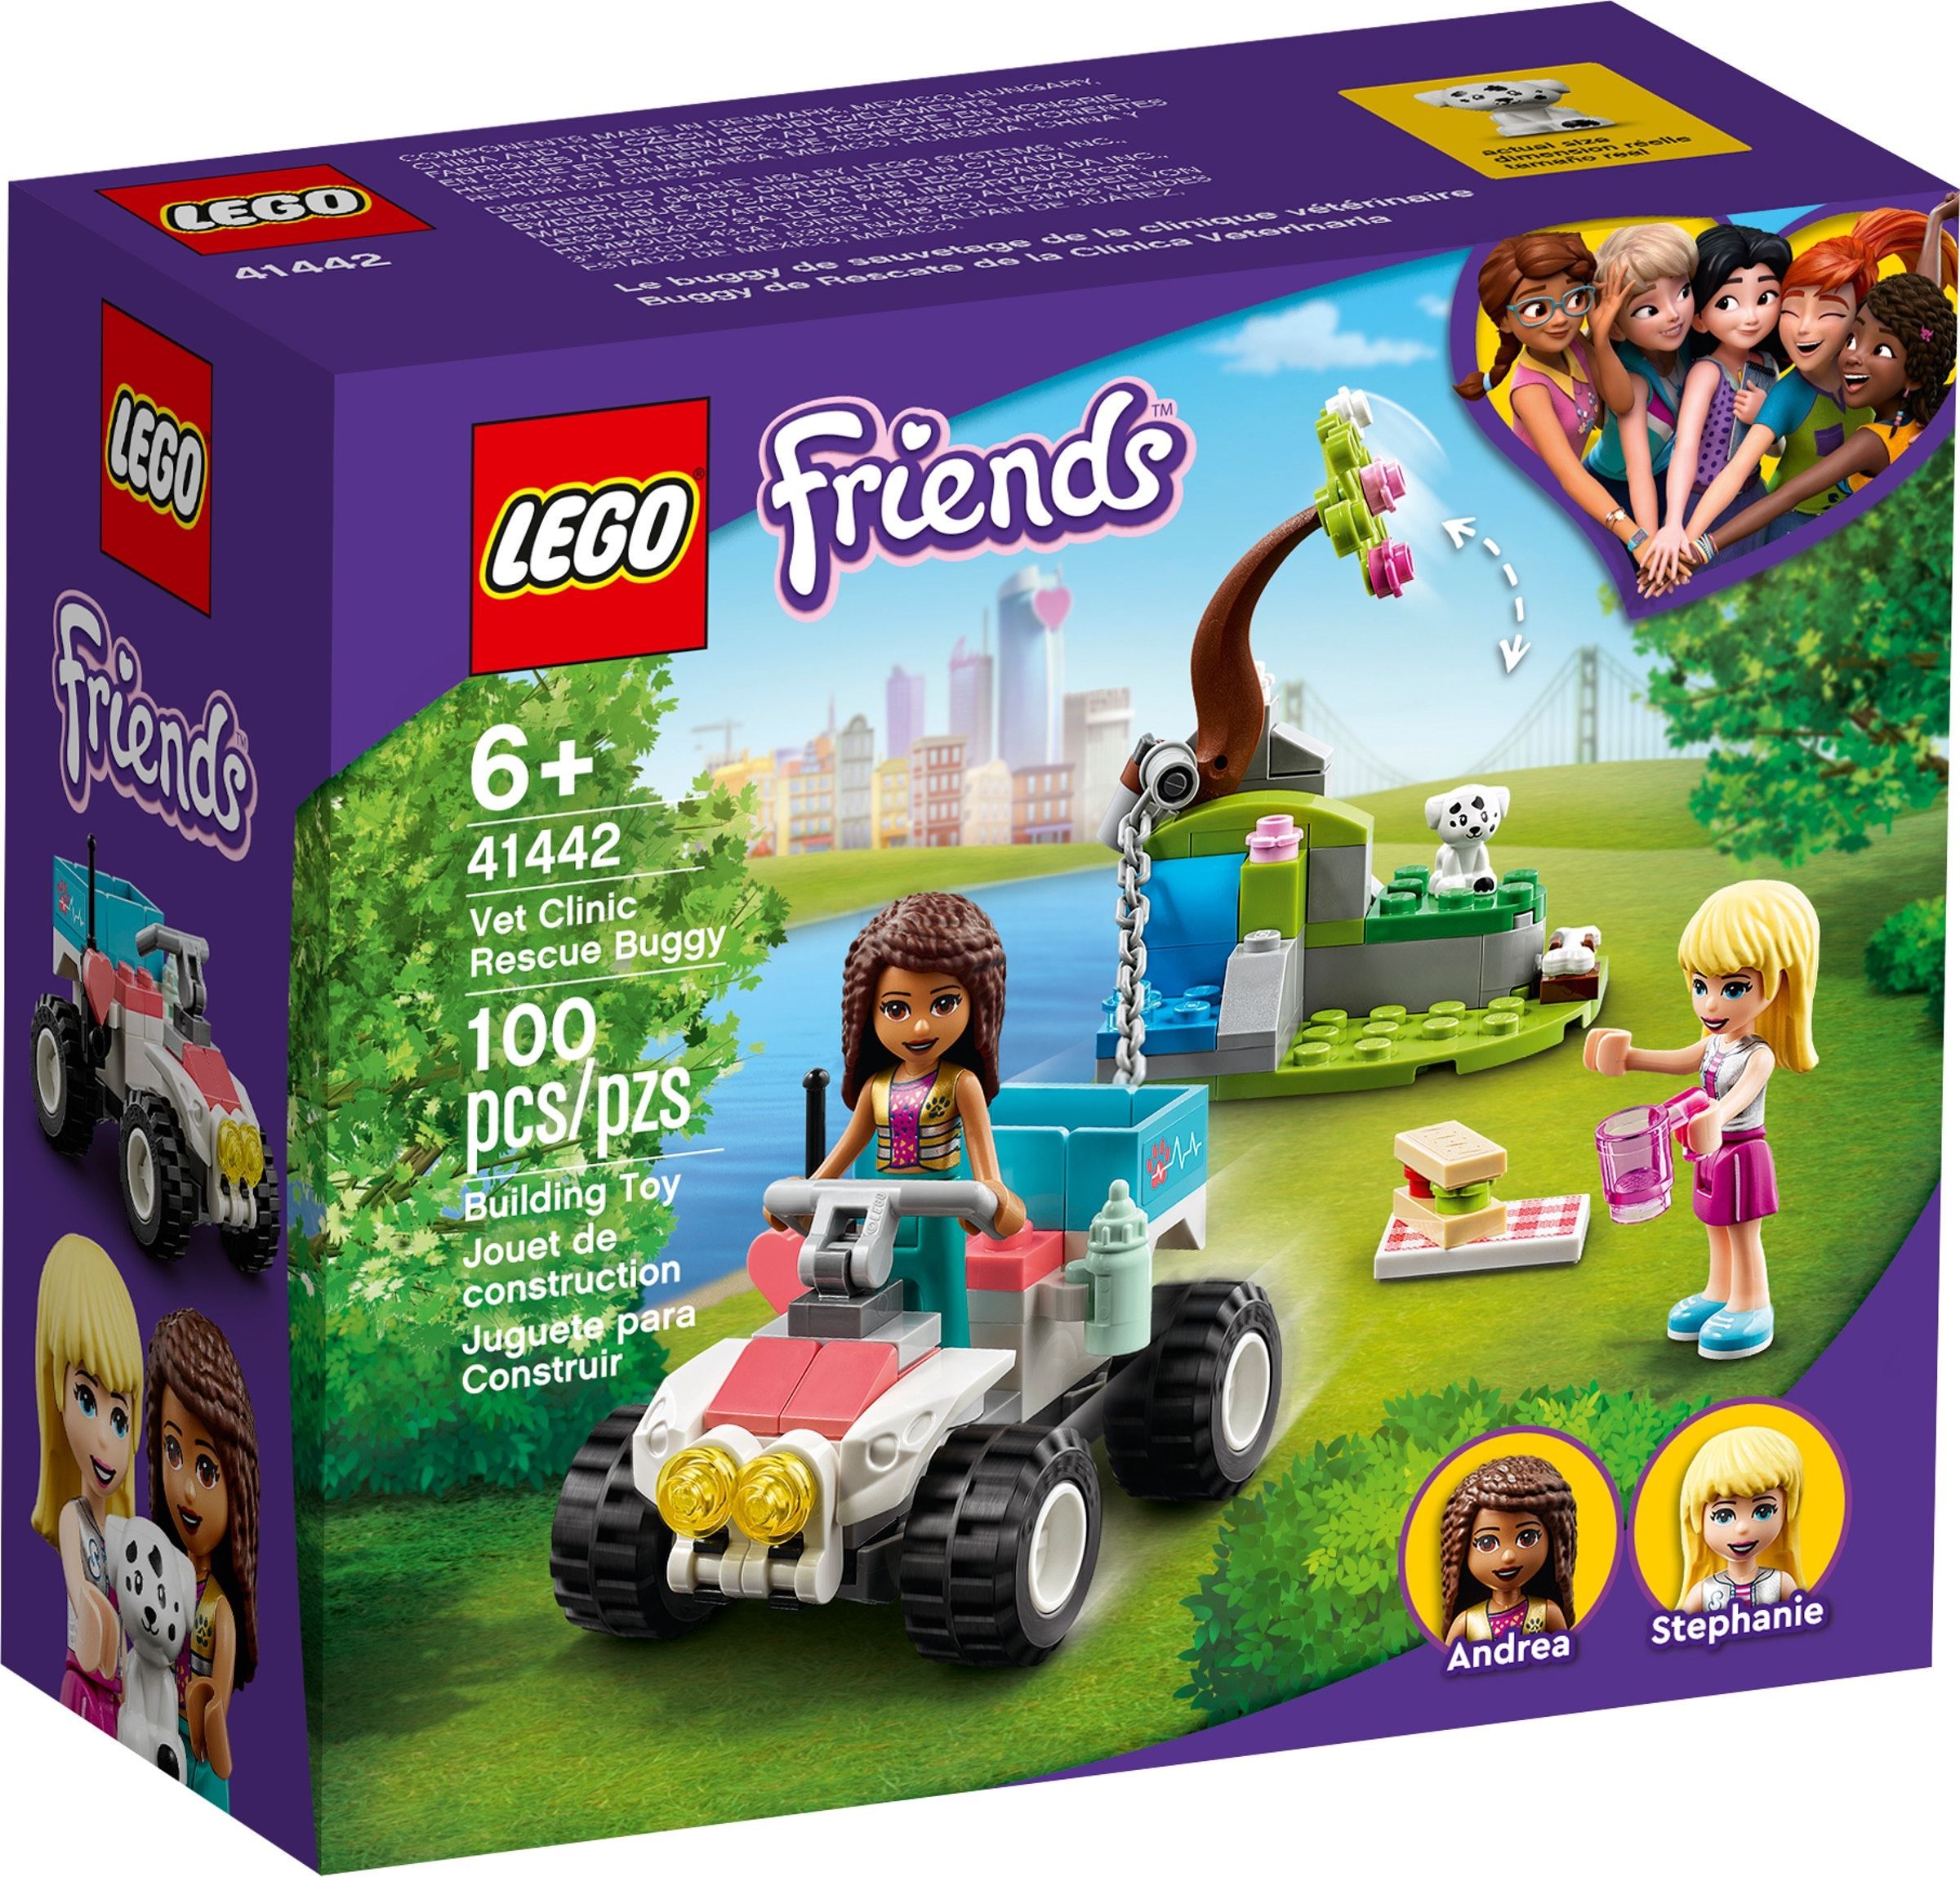 LEGO Friends - Vet Clinic Rescue Buggy (41442)